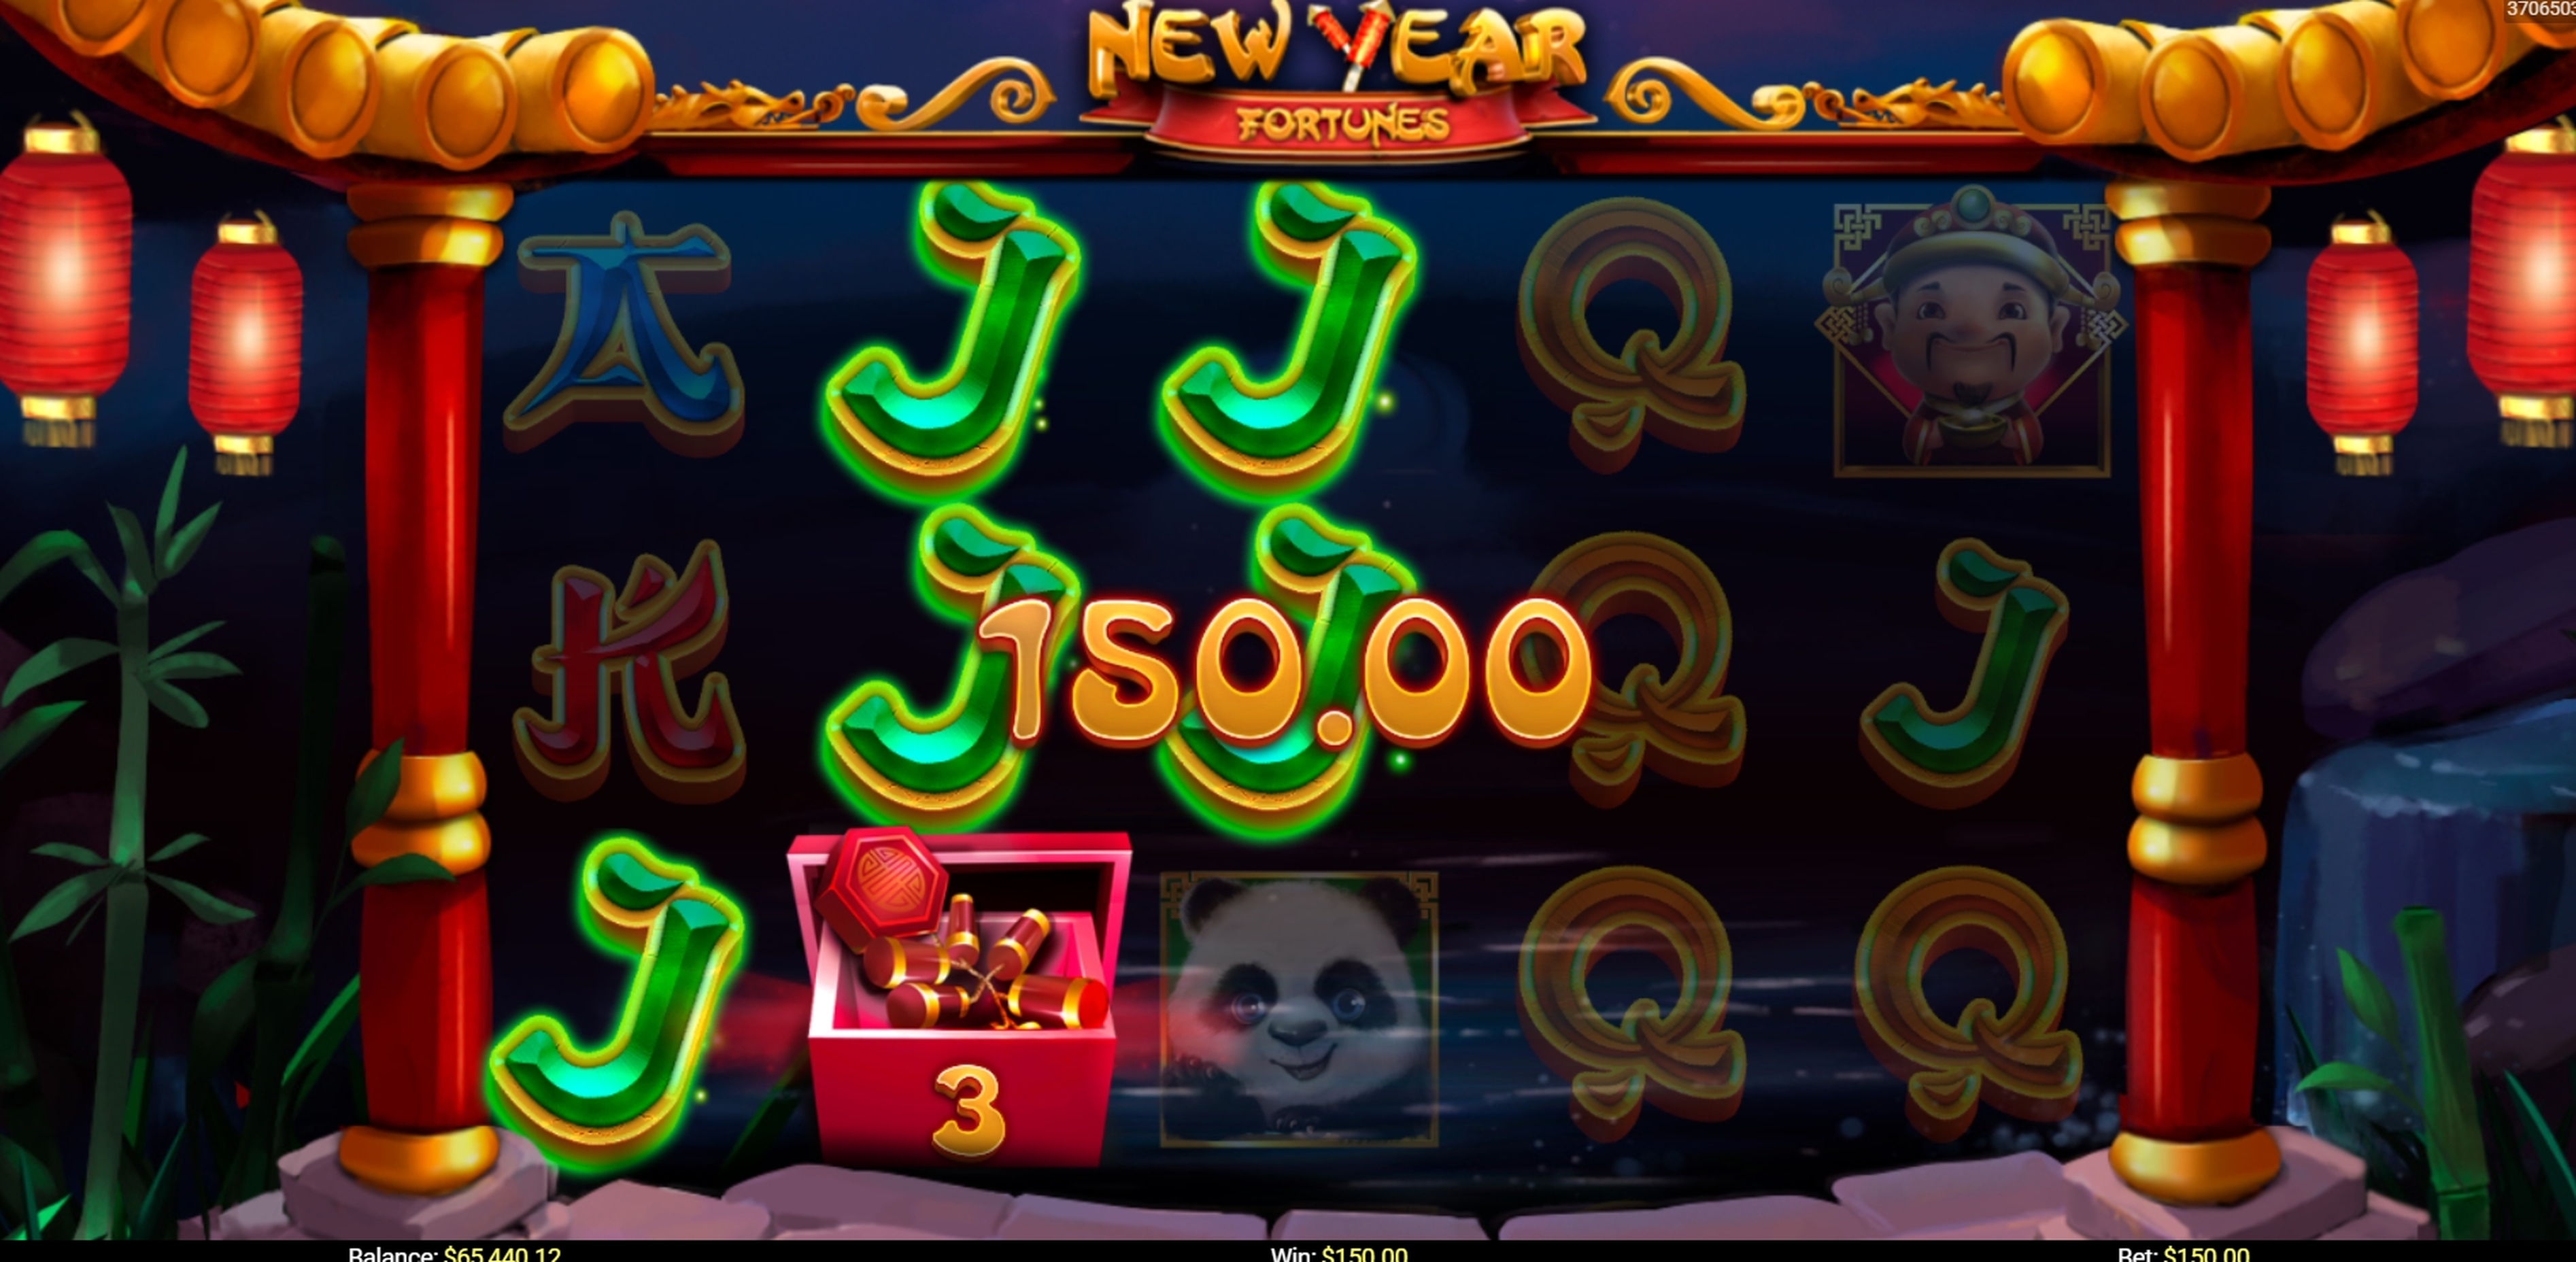 Win Money in New Year Fortunes Free Slot Game by Mobilots